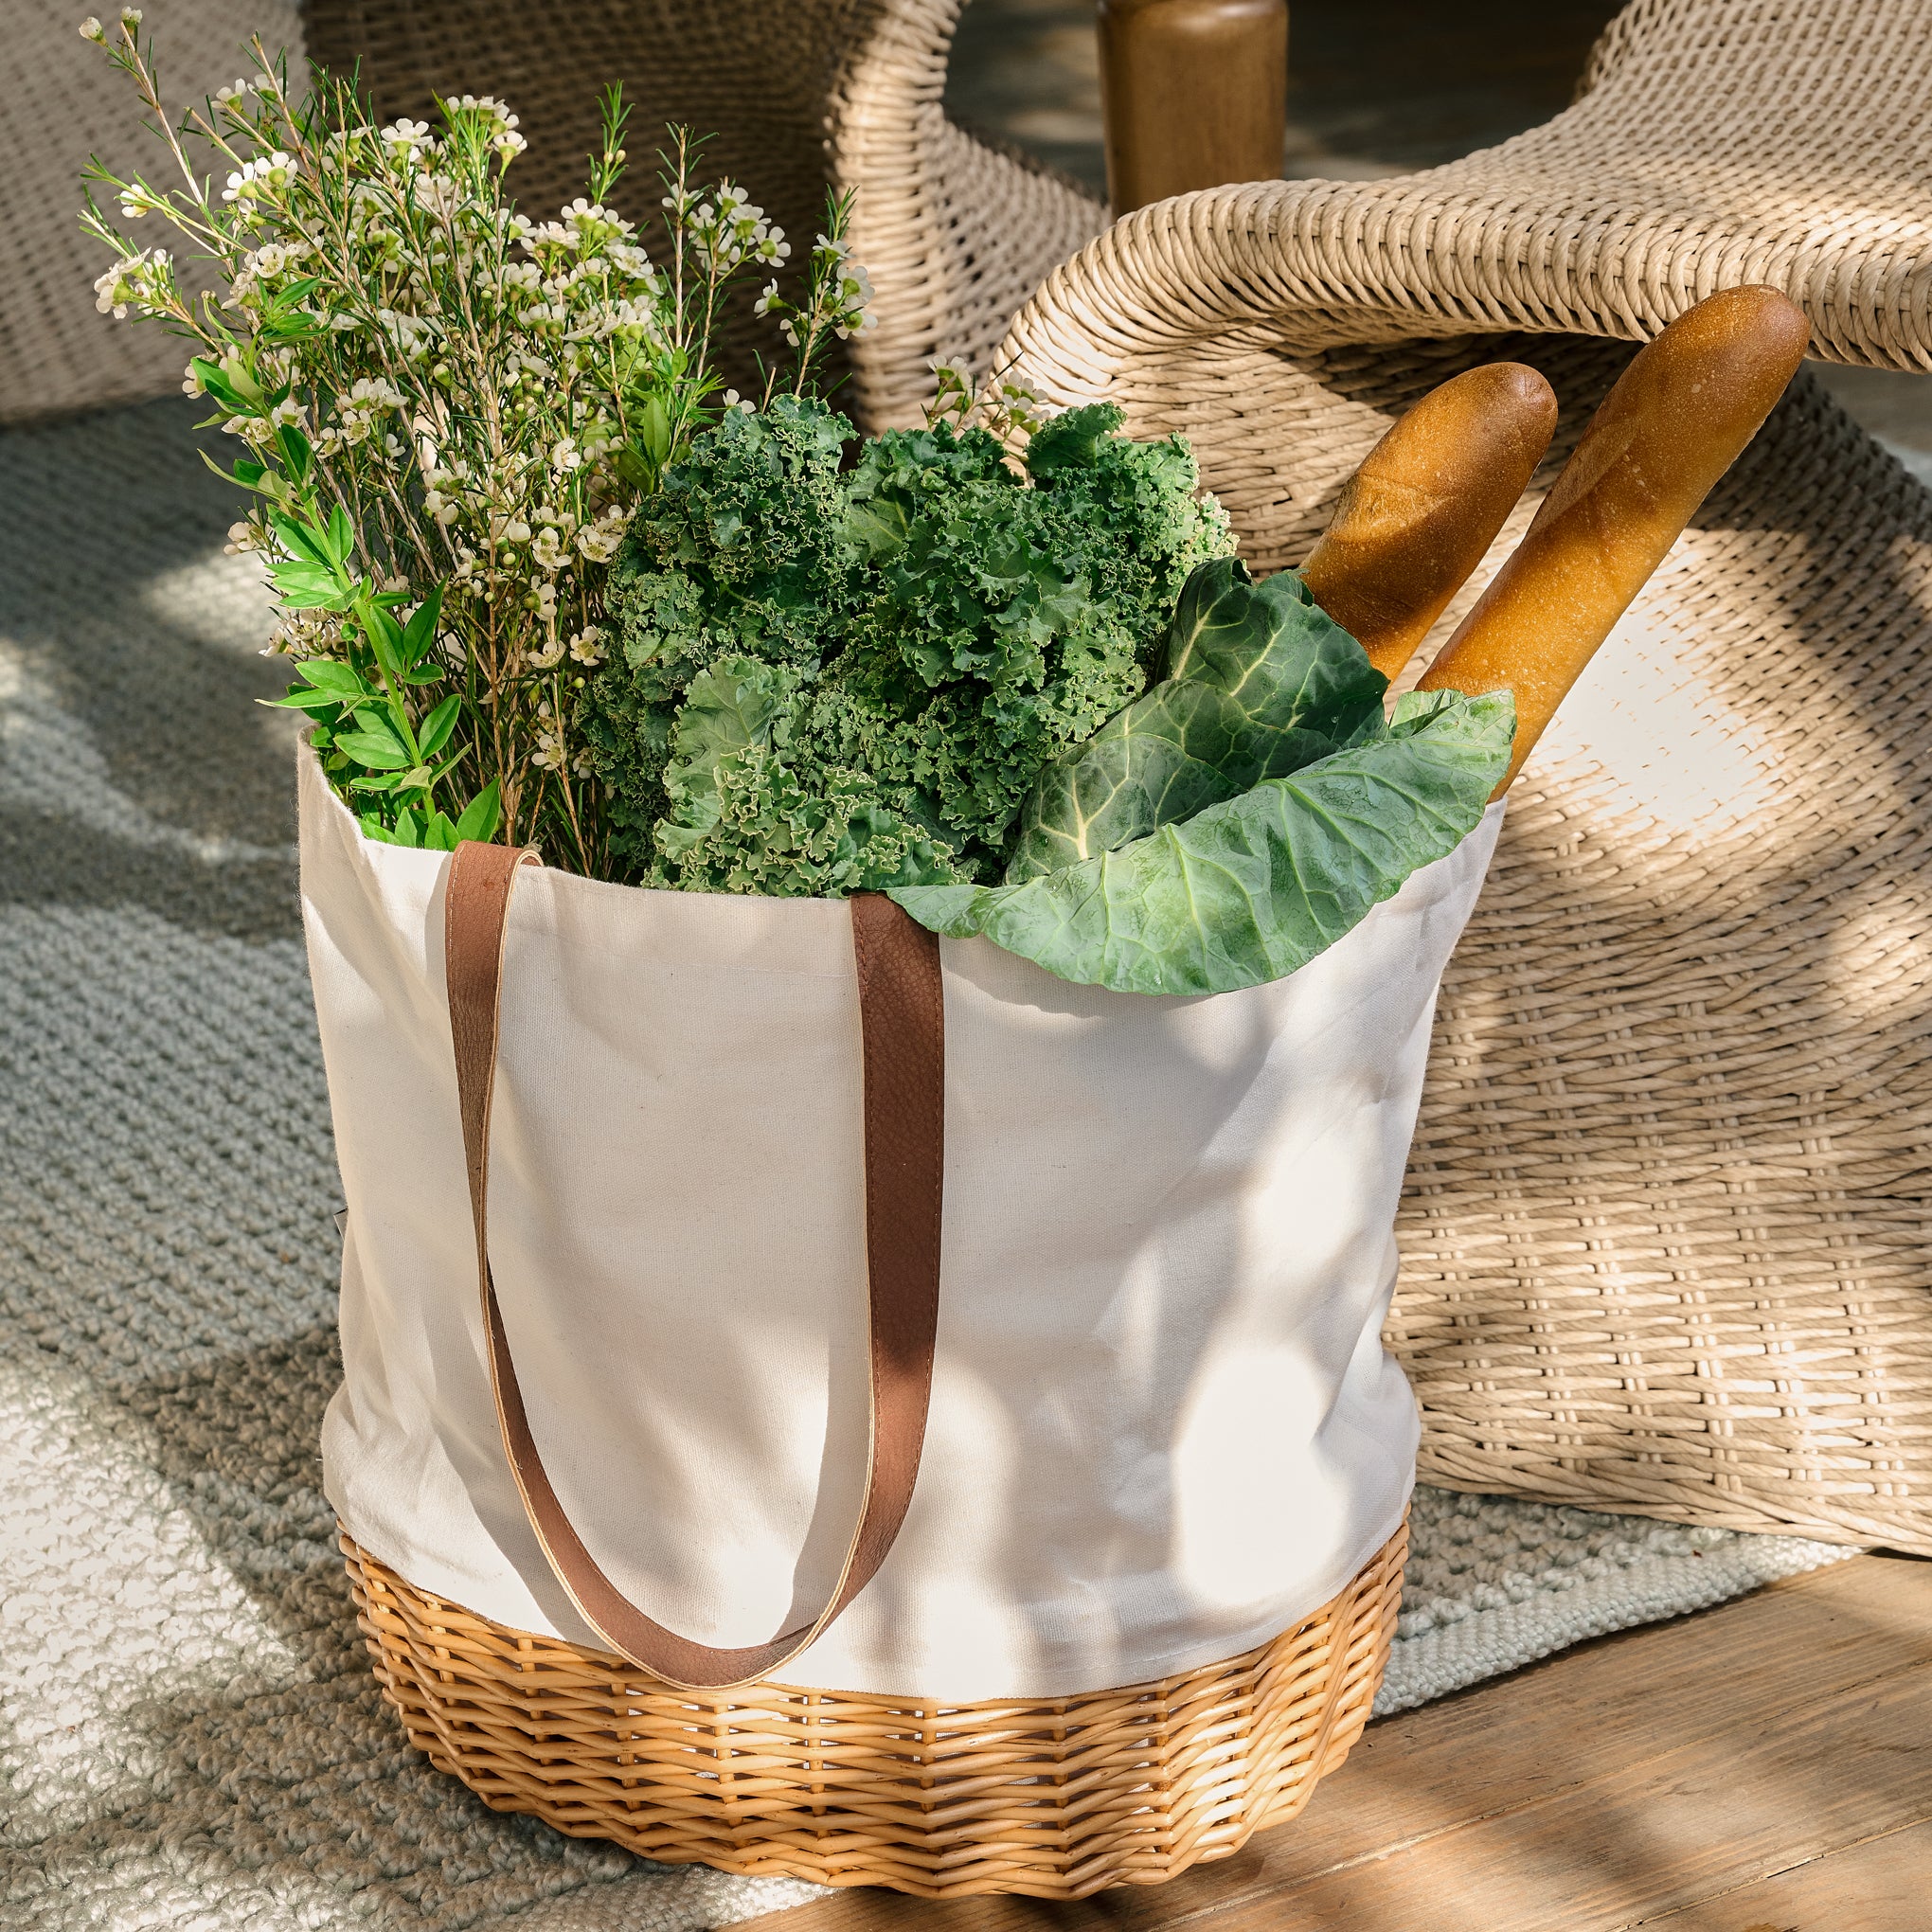 Coronado Willow + Canvas Basket Tote with kale and bread inside $49.95